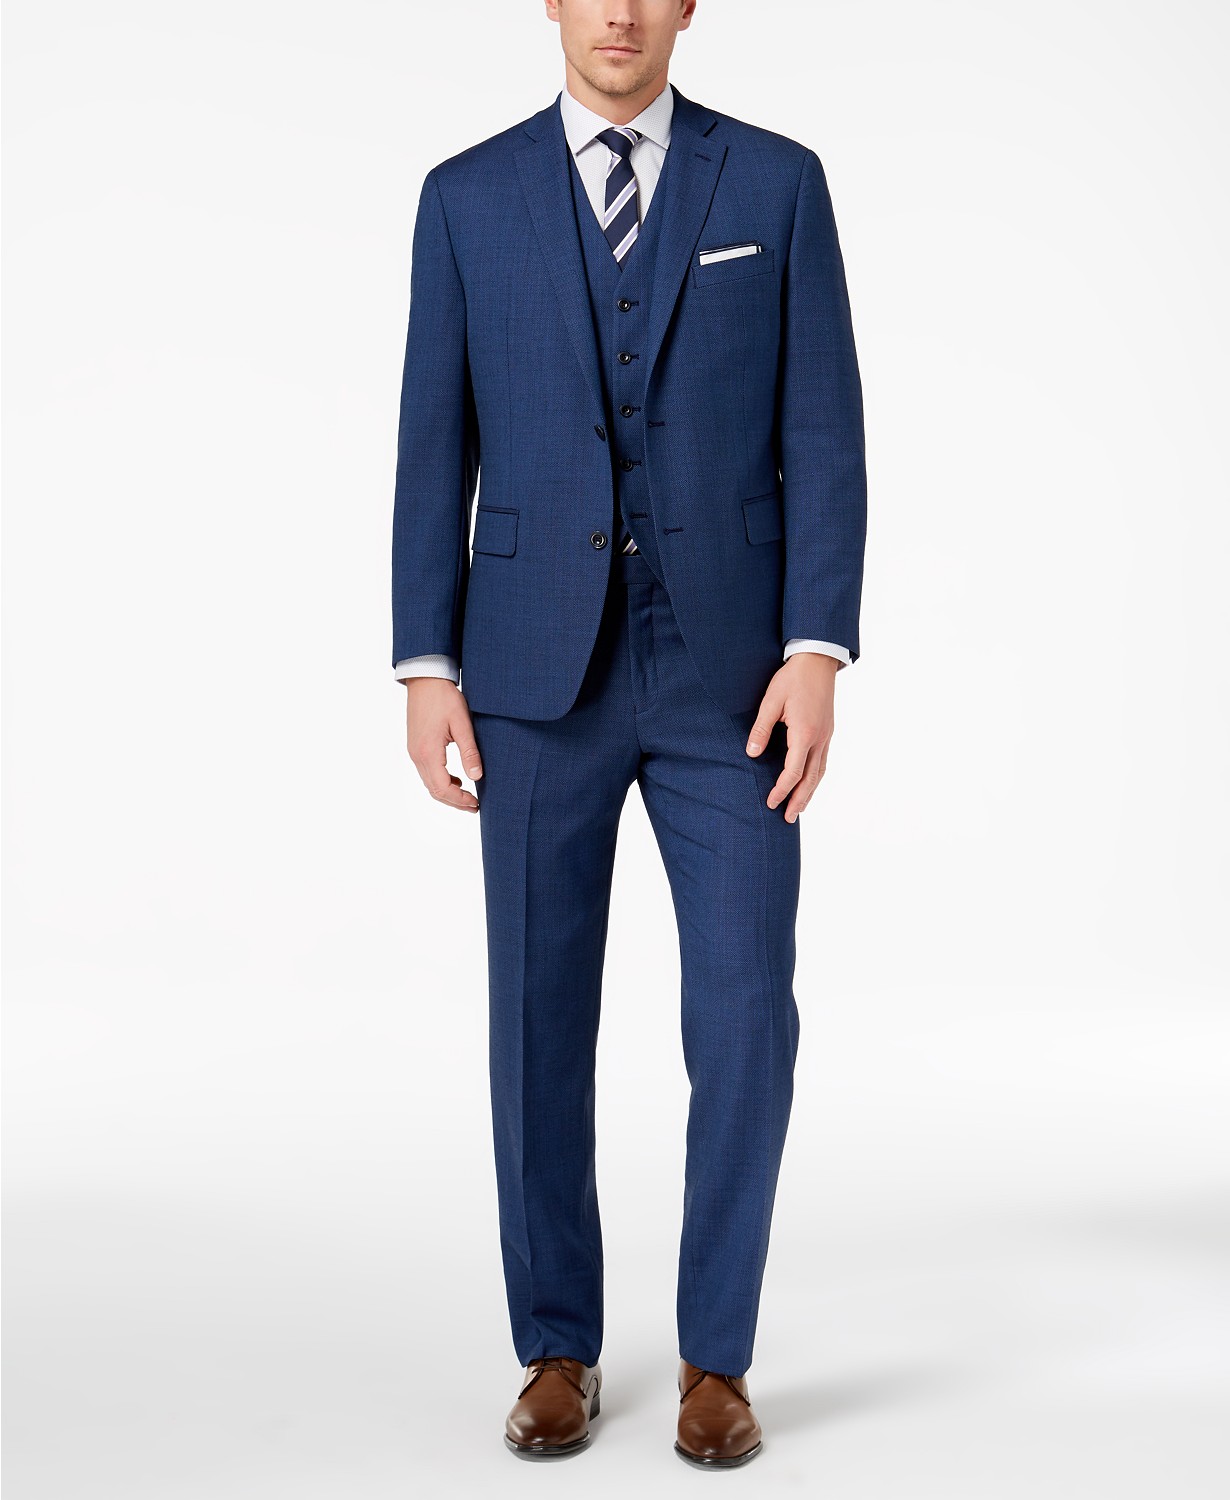 Three-Piece Suits Perfect for Your 